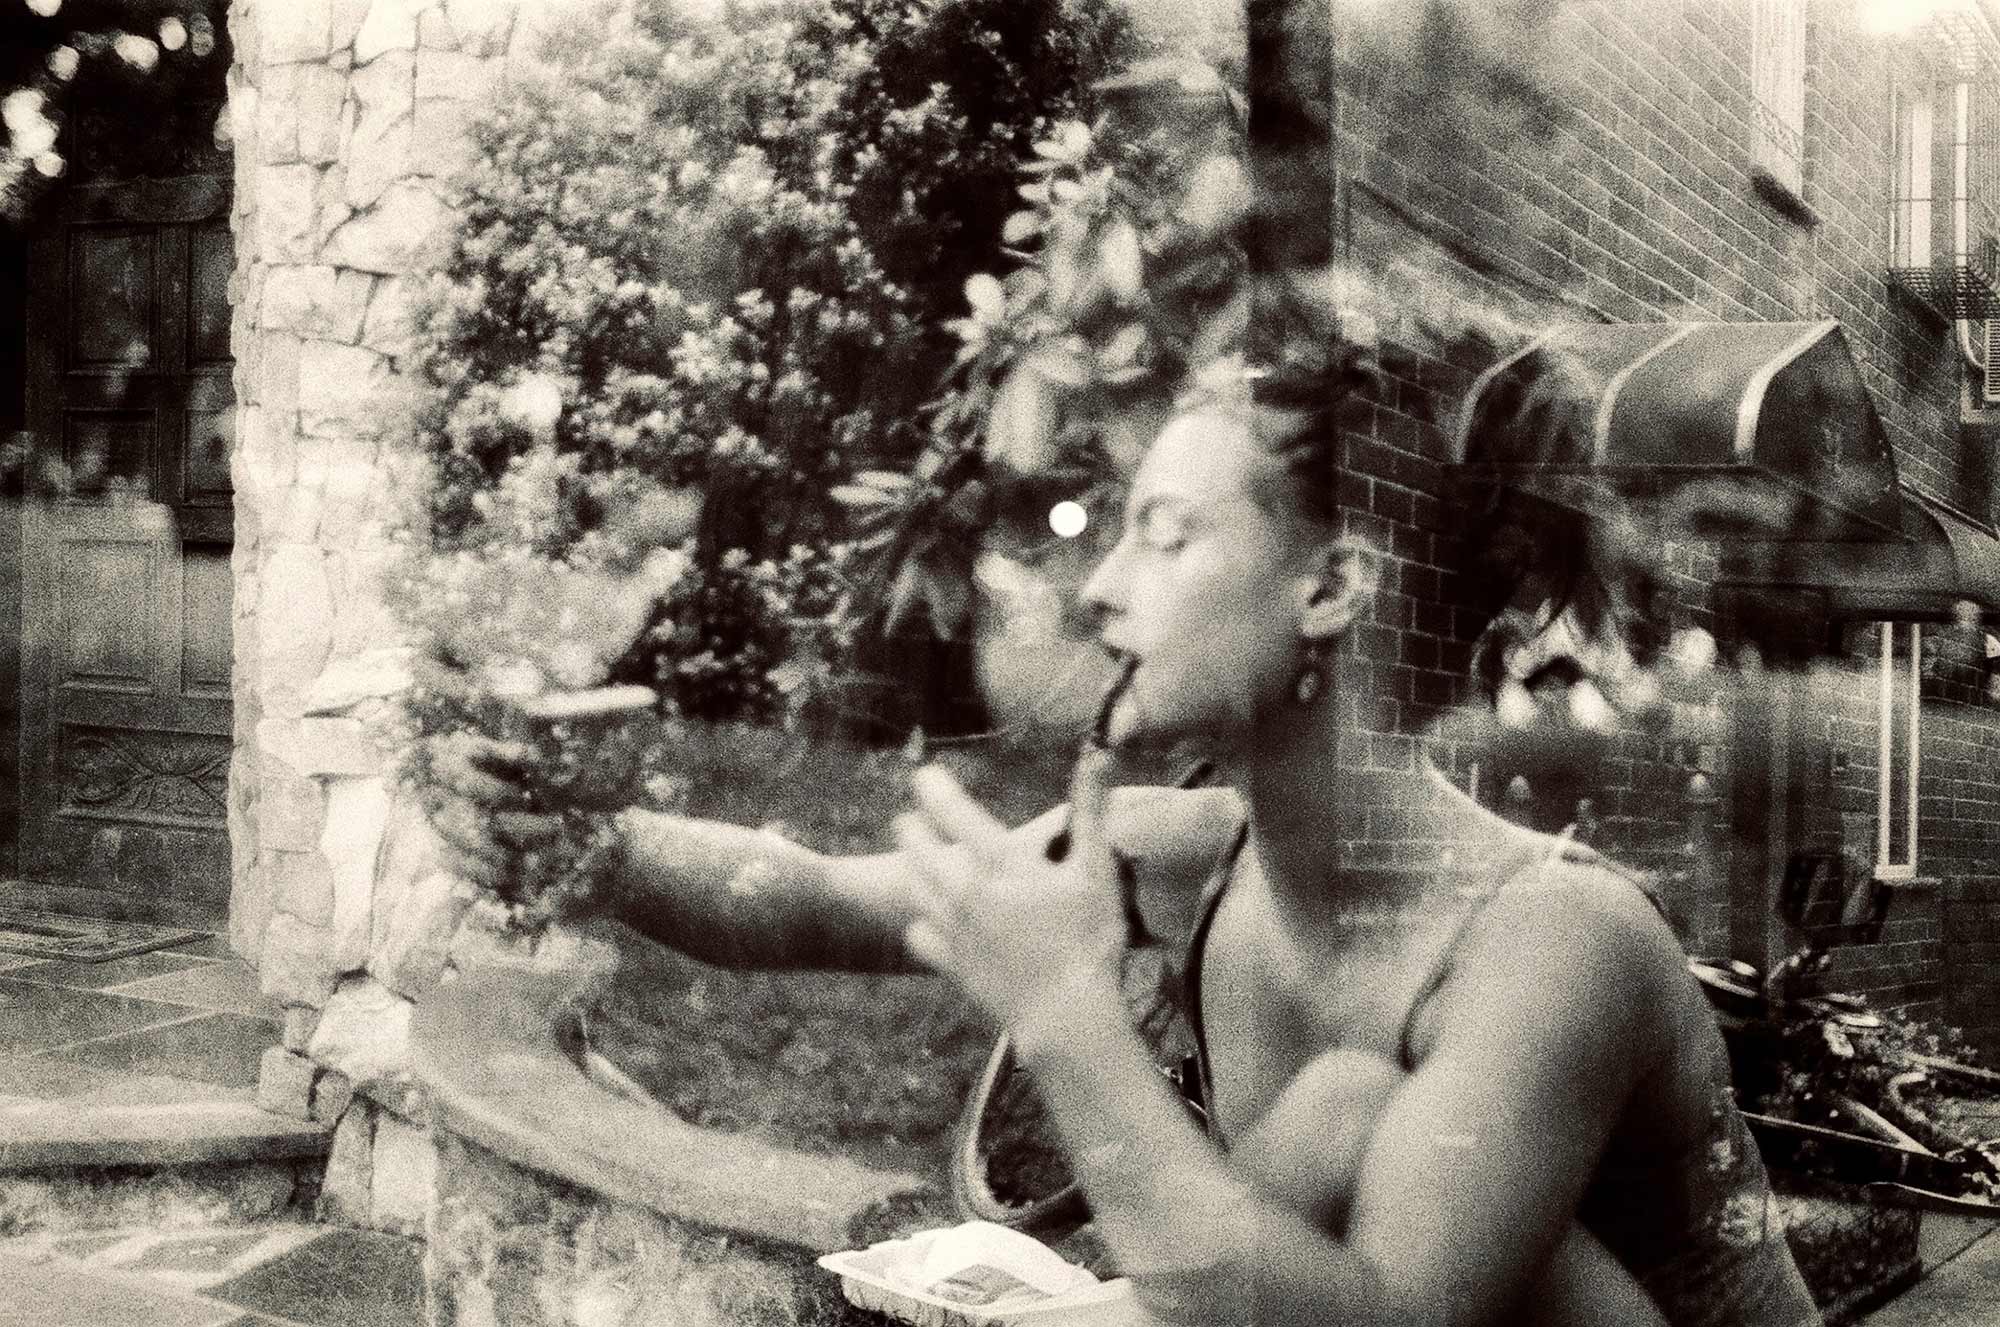 A double exposed photograph of a woman sitting outside